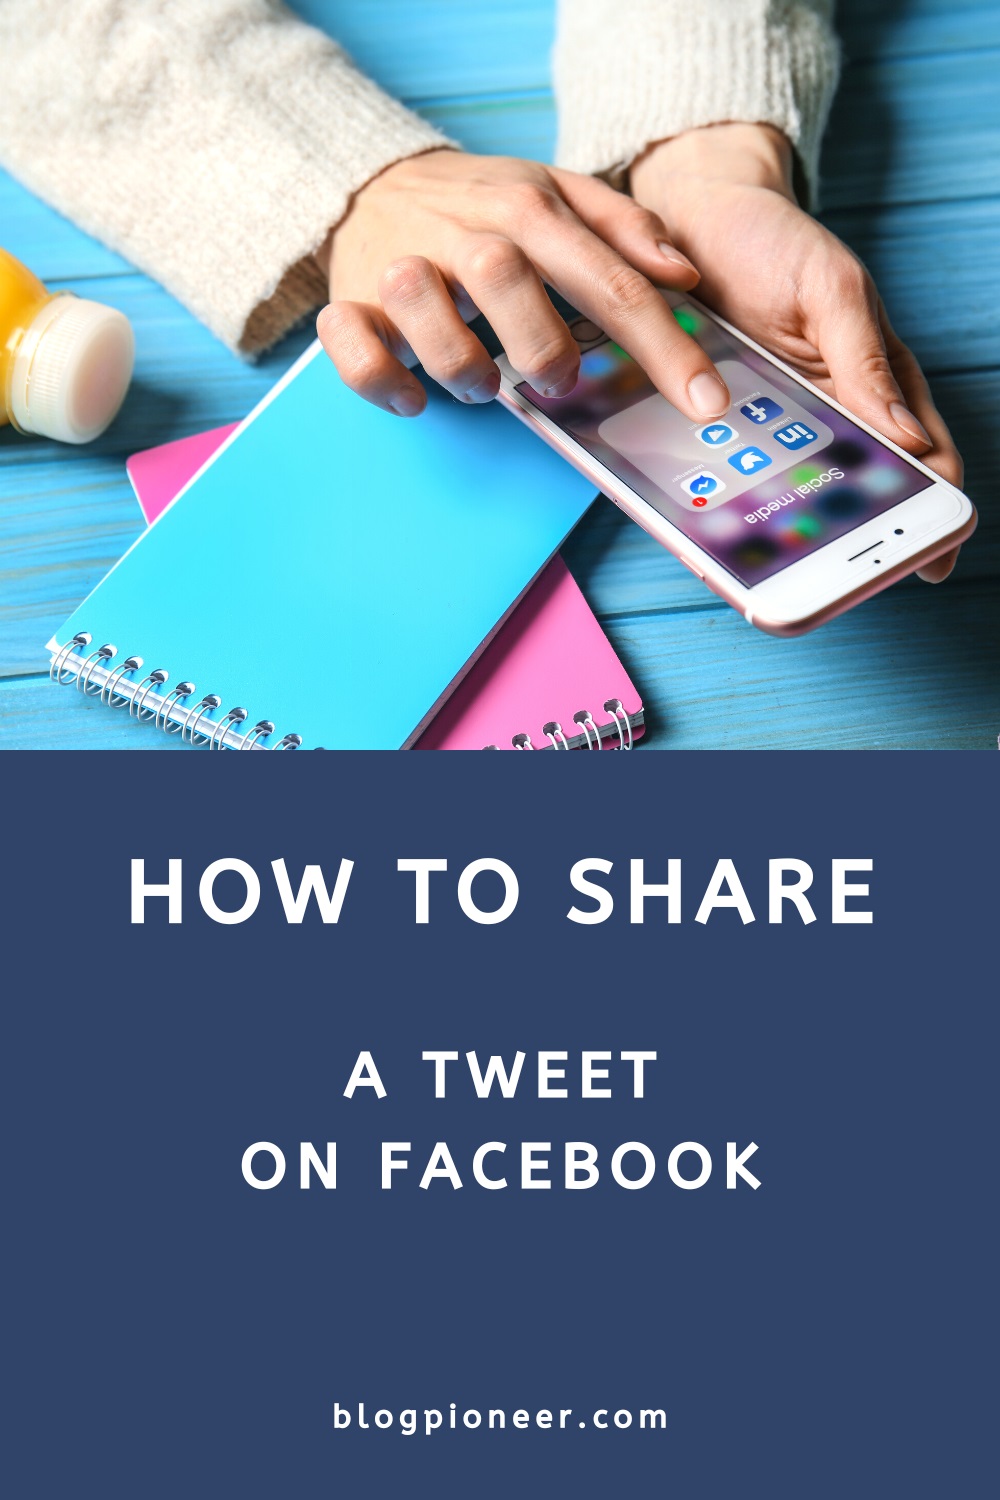 How to share a Tweet on Facebook